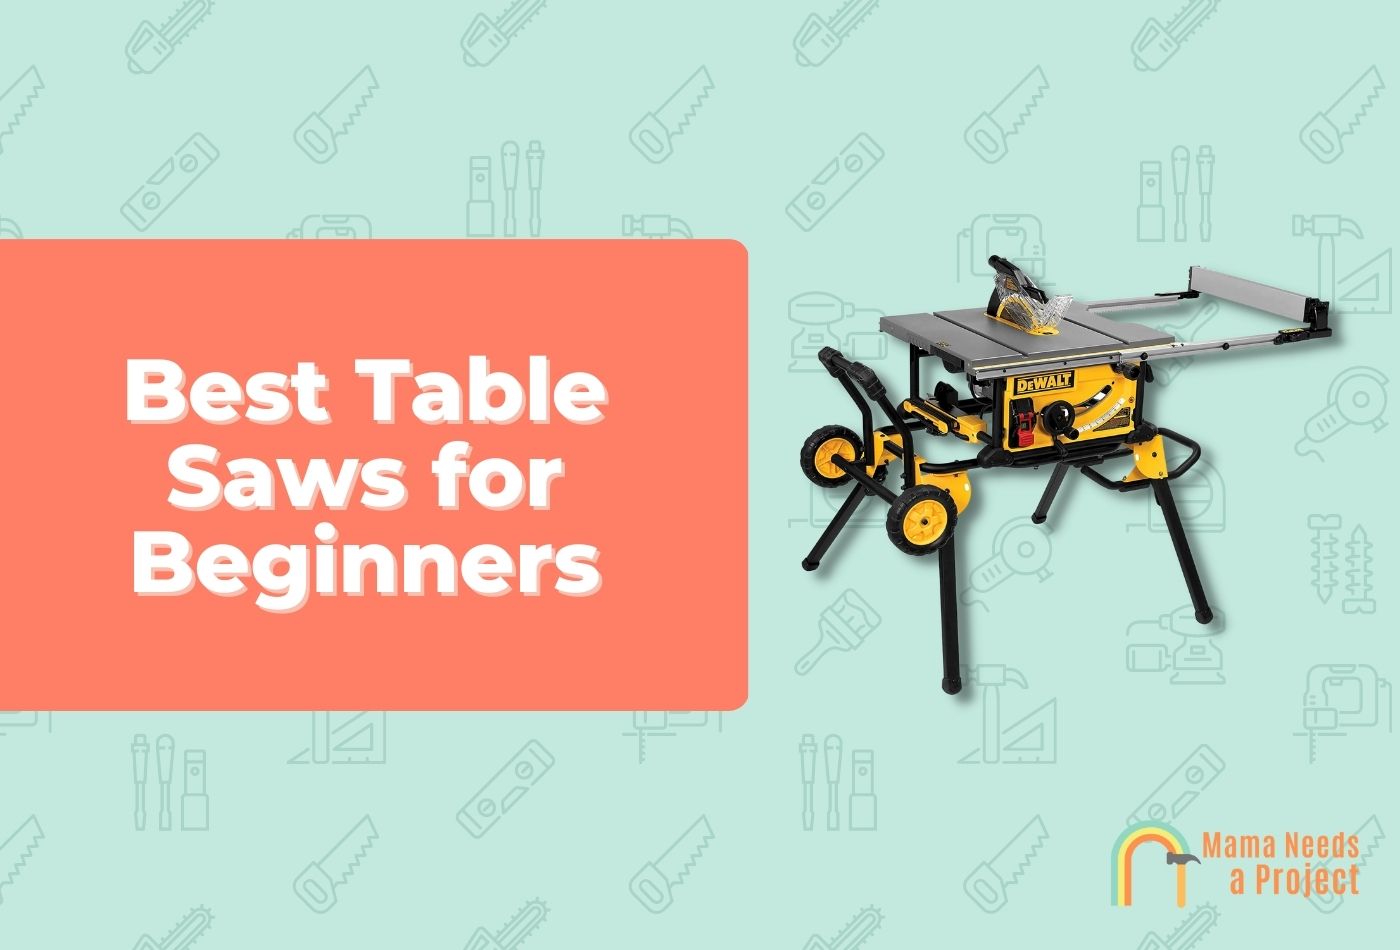 Best Table Saws for Beginners